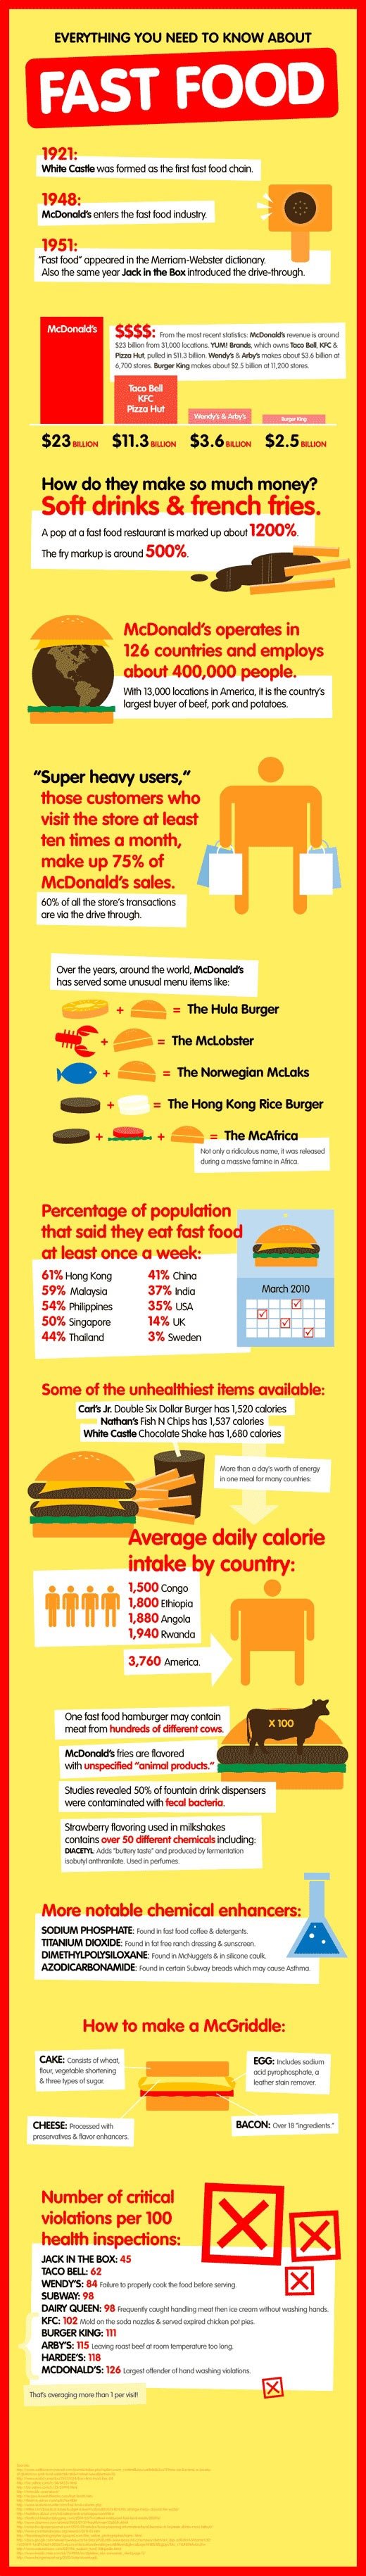 Everything you need to know about fast food.